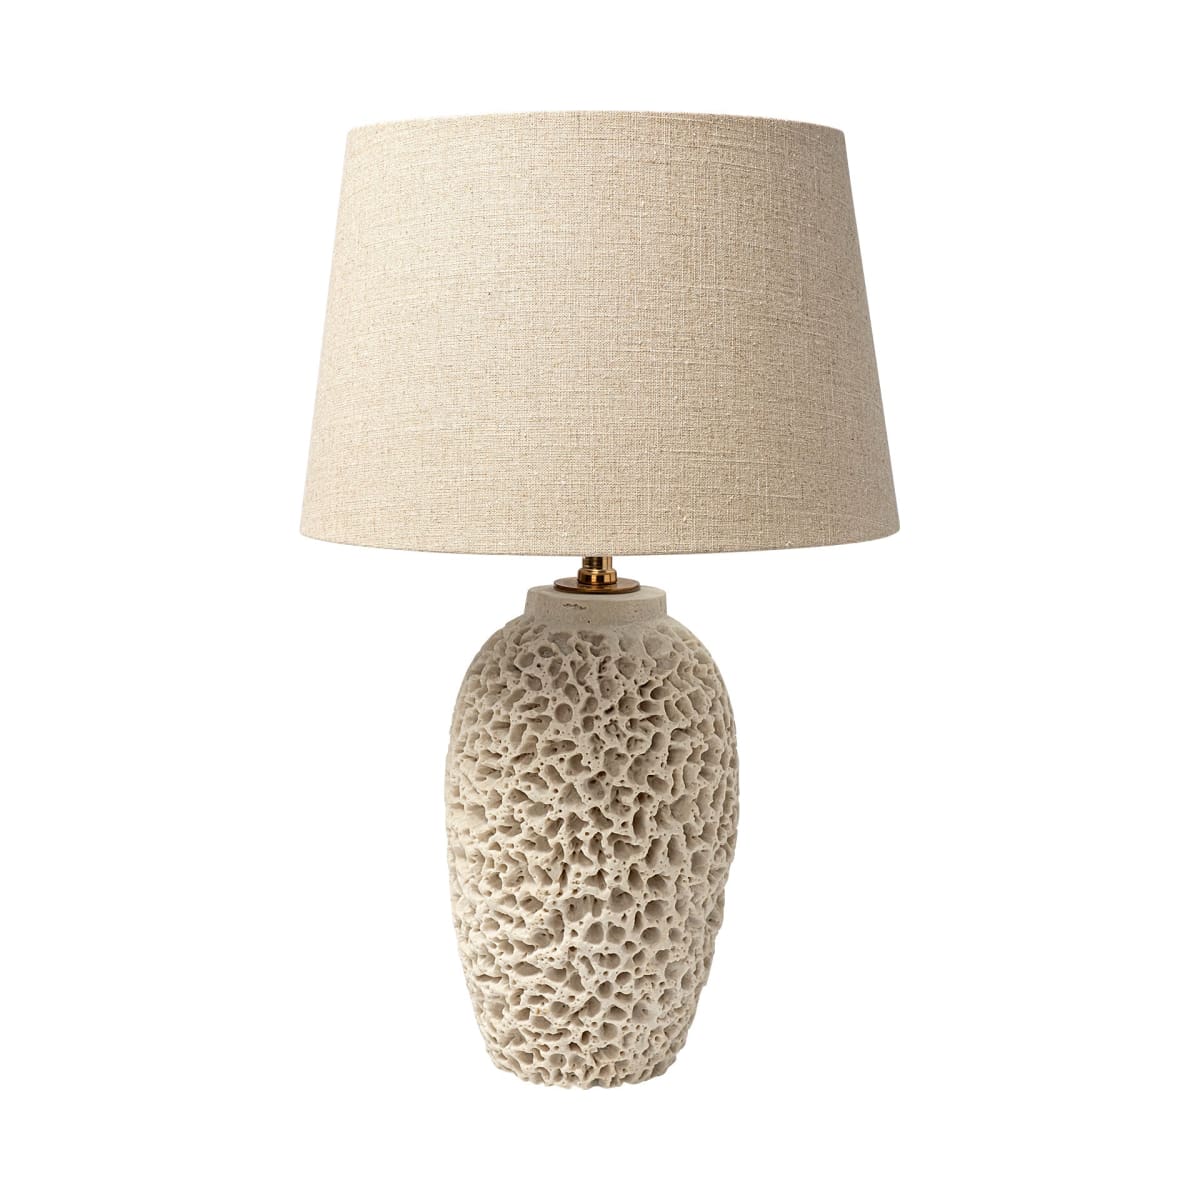 Mariam Table Lamp Beige Resin - table-lamps